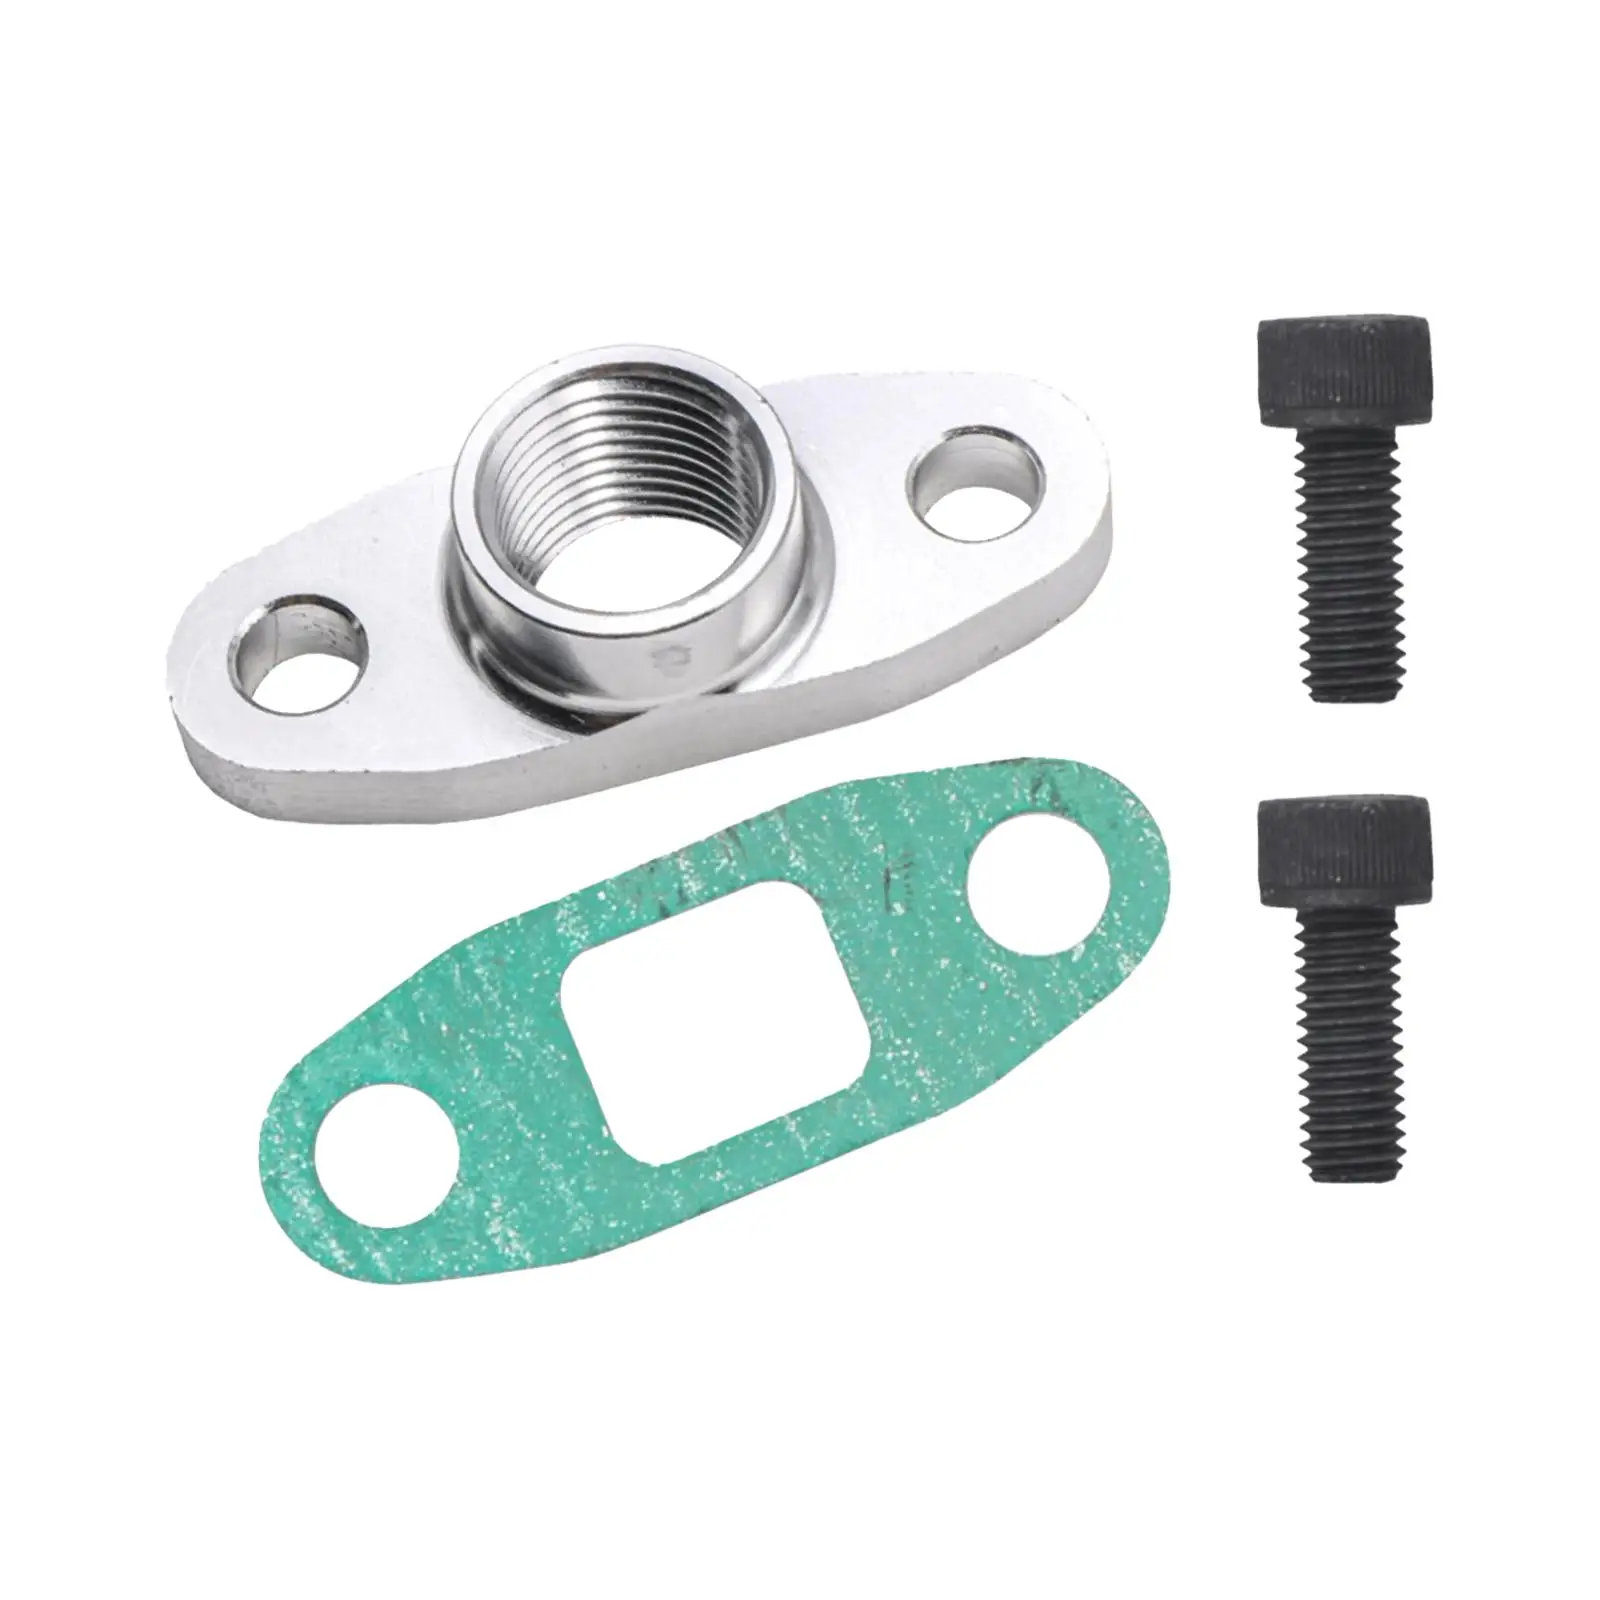 Oil Drain Outlet Flange Gasket Adapter Set with Bolts Durable Accessory AN10 Fitting Aluminum Alloy for T3 T66 GT30